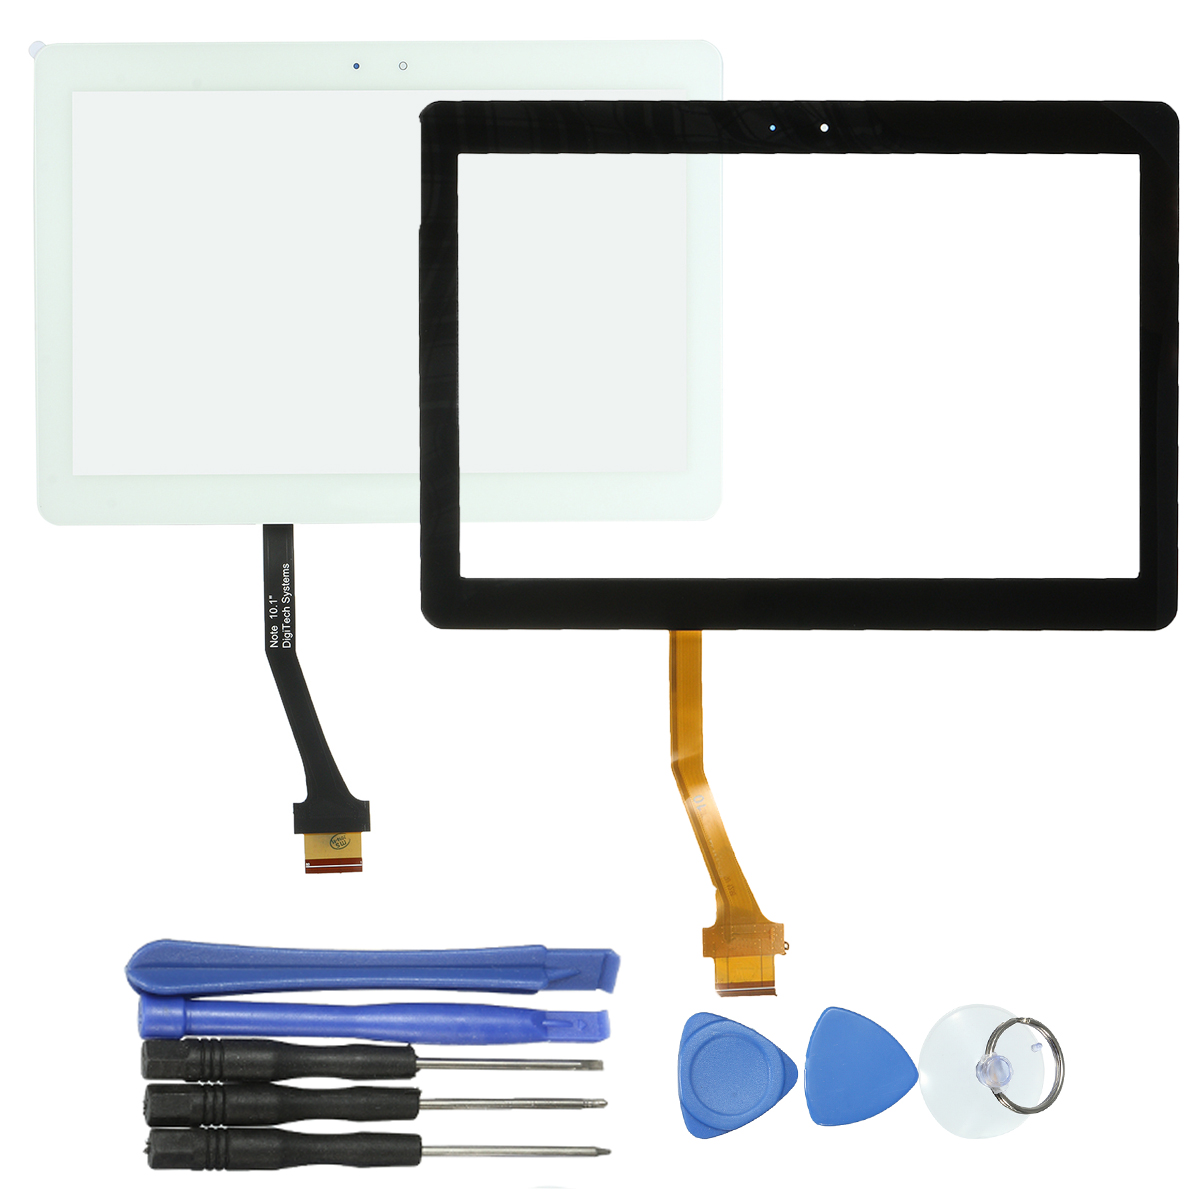 

Touch Screen Replacement Digitizer Panel Repair Tool For Samsung Galaxy Tab 2 P5110 P5100